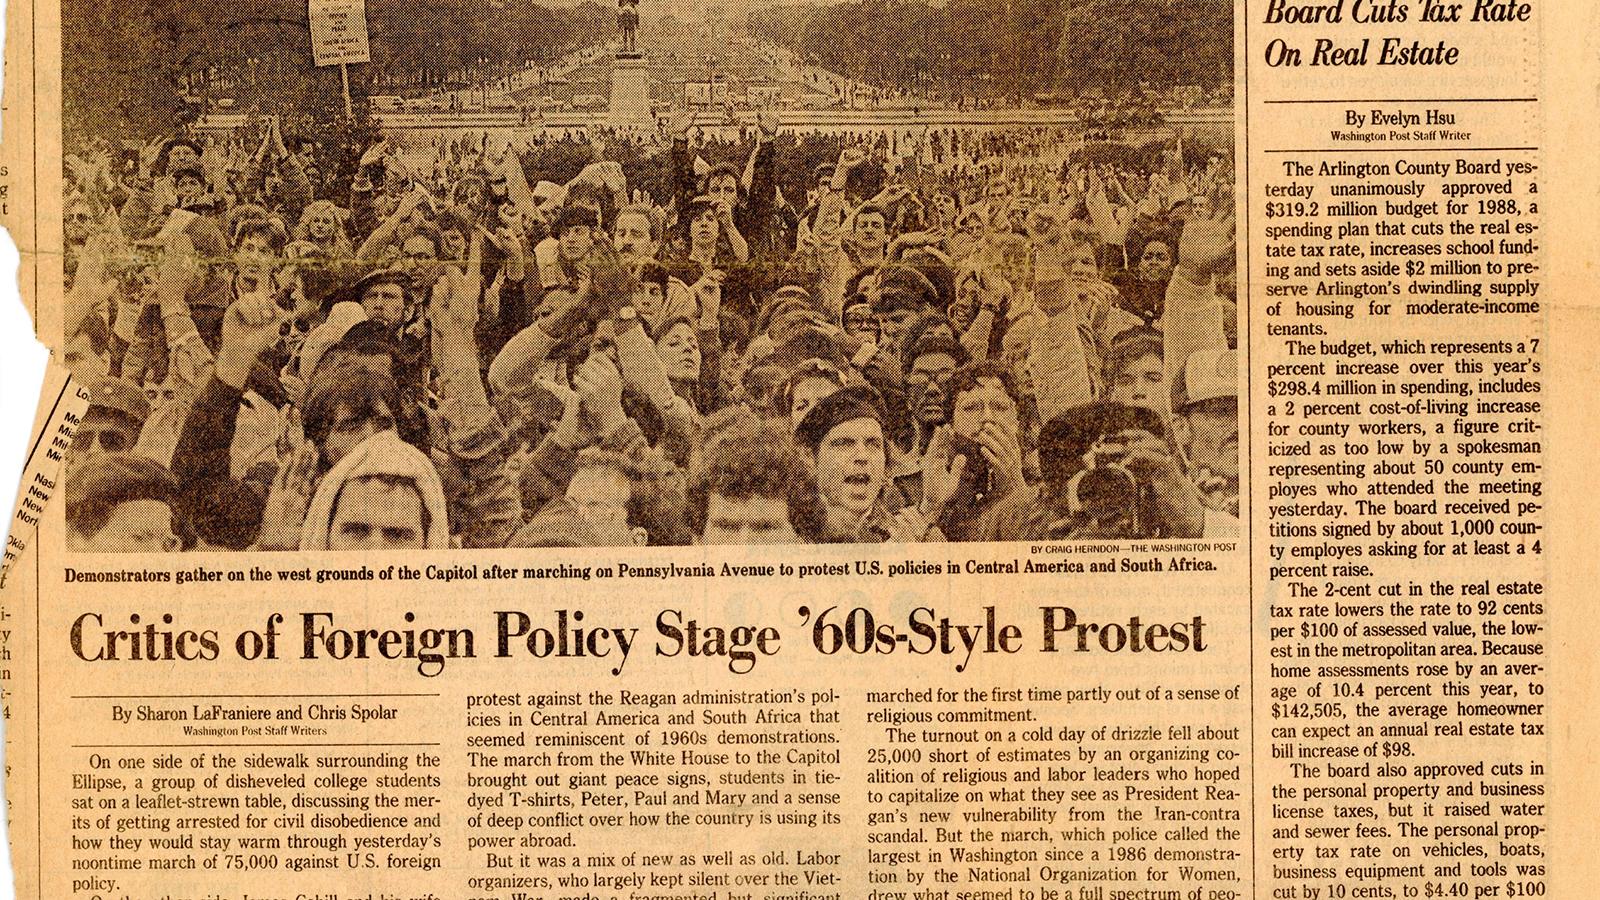 Newspaper clipping about protests in Washington DC